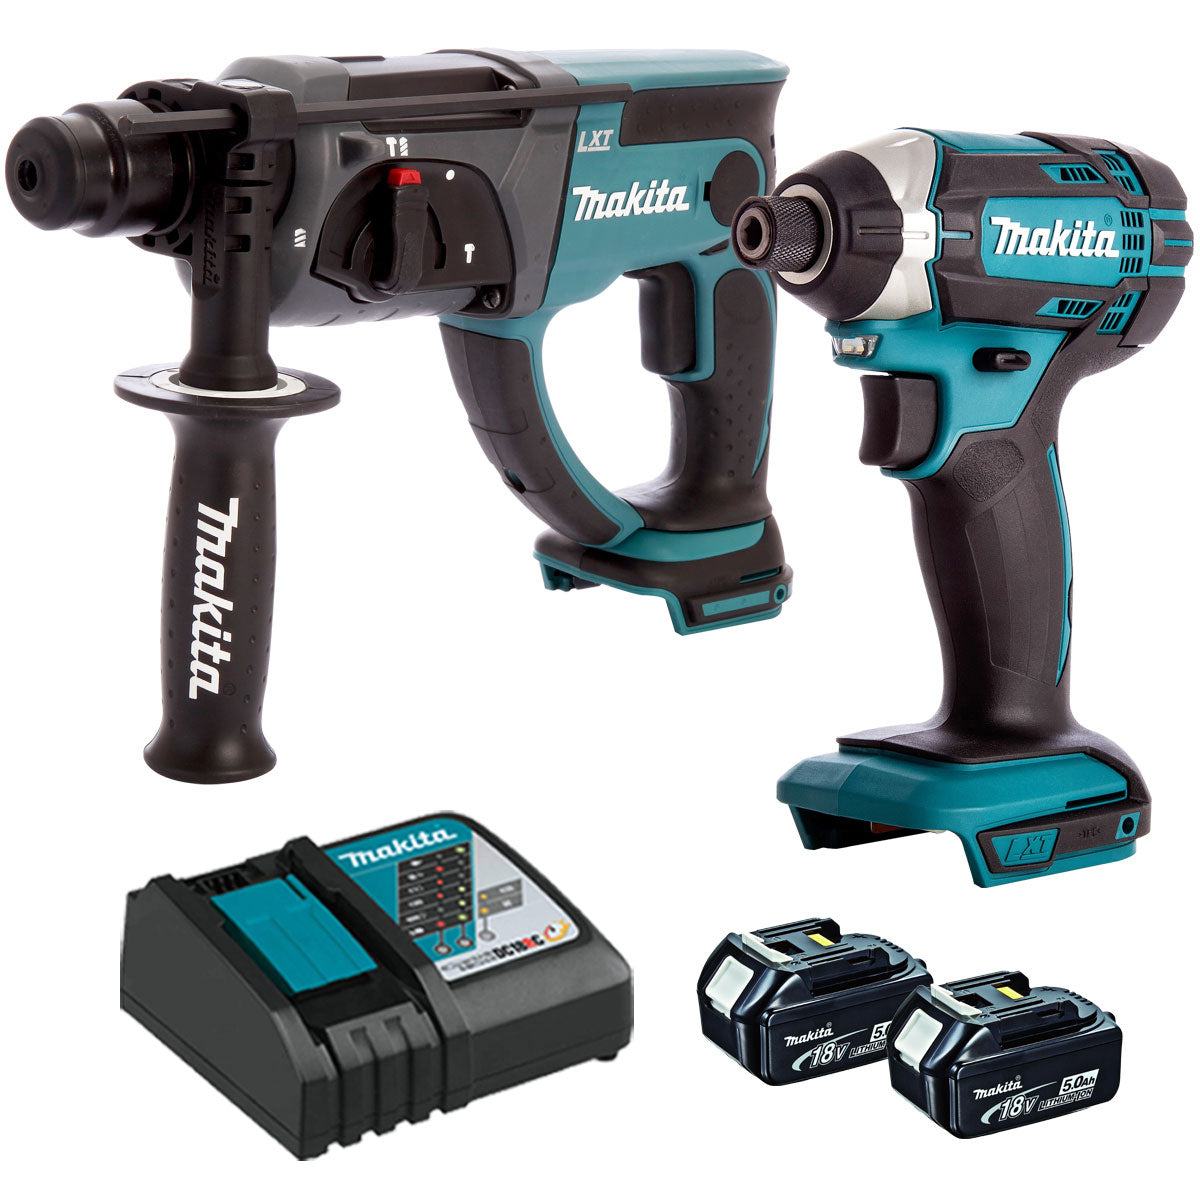 Makita Rotary Hammer Drill & Impact Driver with 2 x 5.0Ah Batteries & Charger